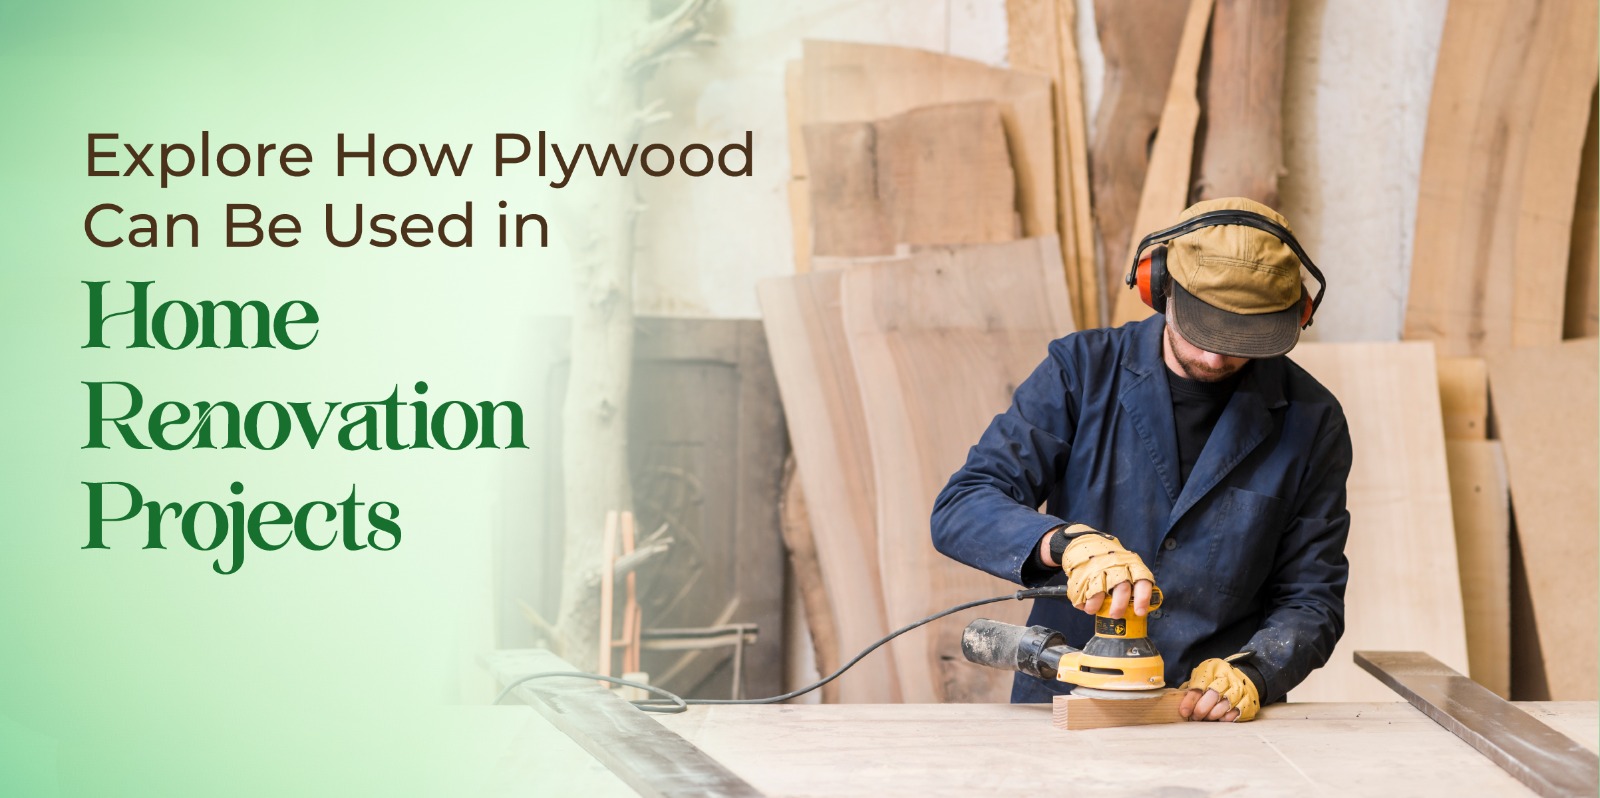 Explore How Plywood Can Be Used in Home Renovation Projects